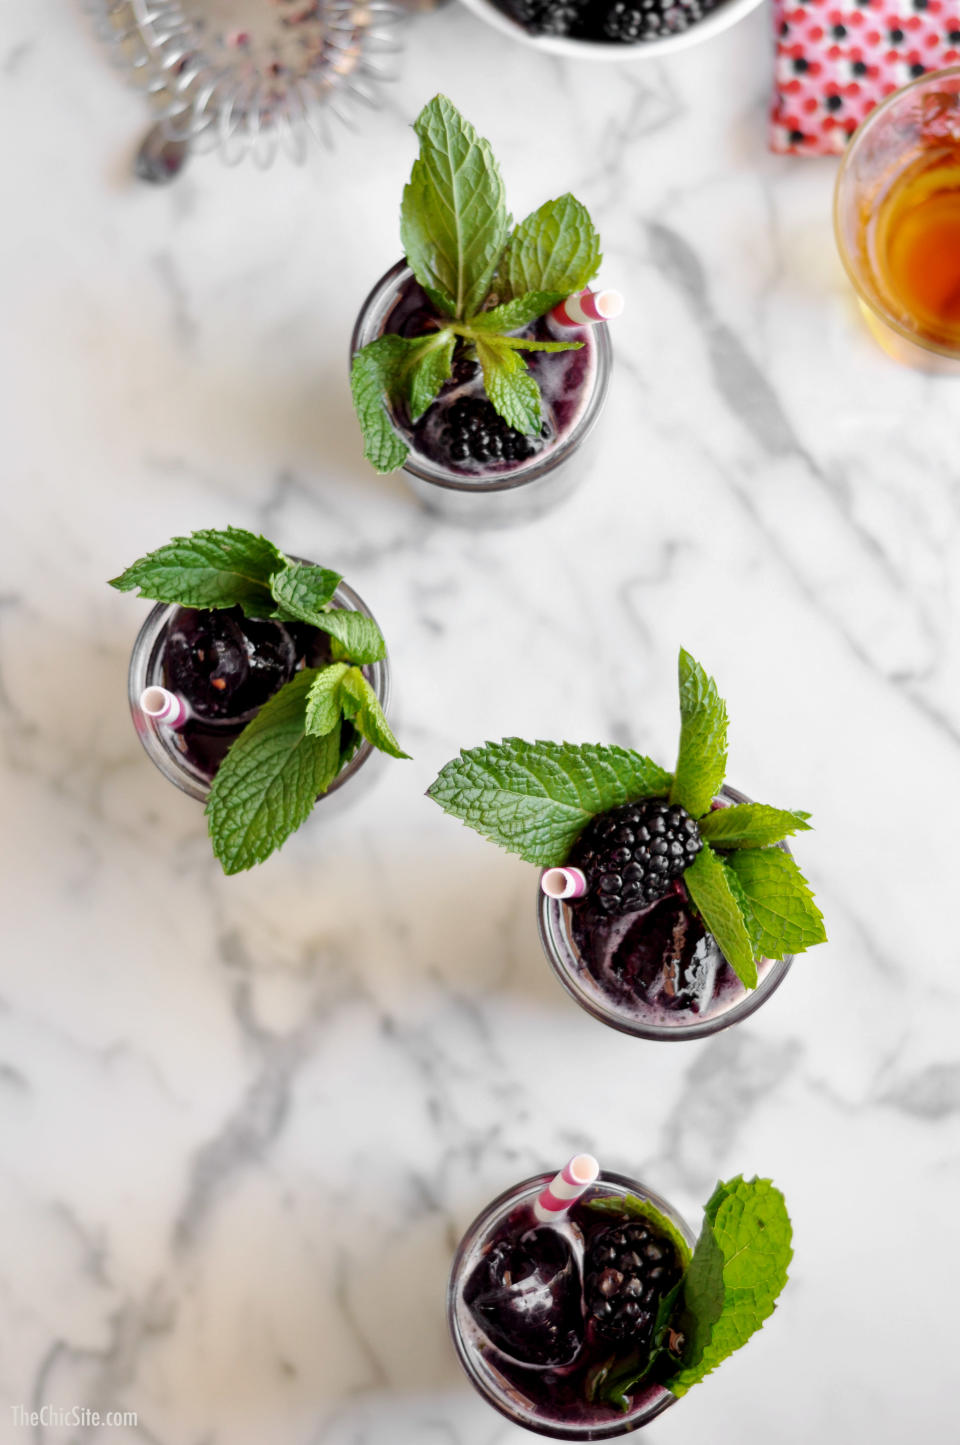 <strong>Get the <a href="http://thechicsite.com/2014/05/16/blackberry-mint-julep/" target="_blank">Blackberry Mint Julep recipe</a> from The Chic Site</strong>